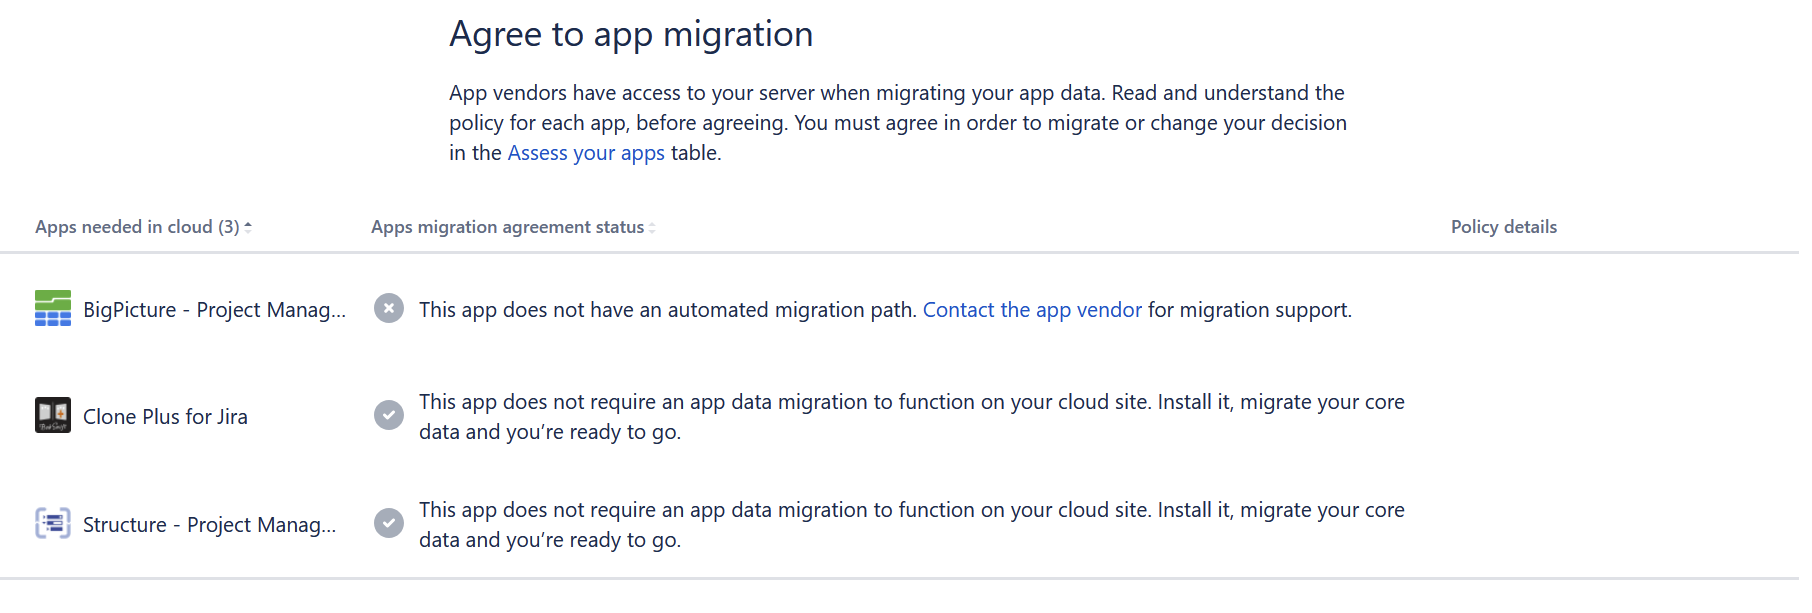 agree to jira app migration 